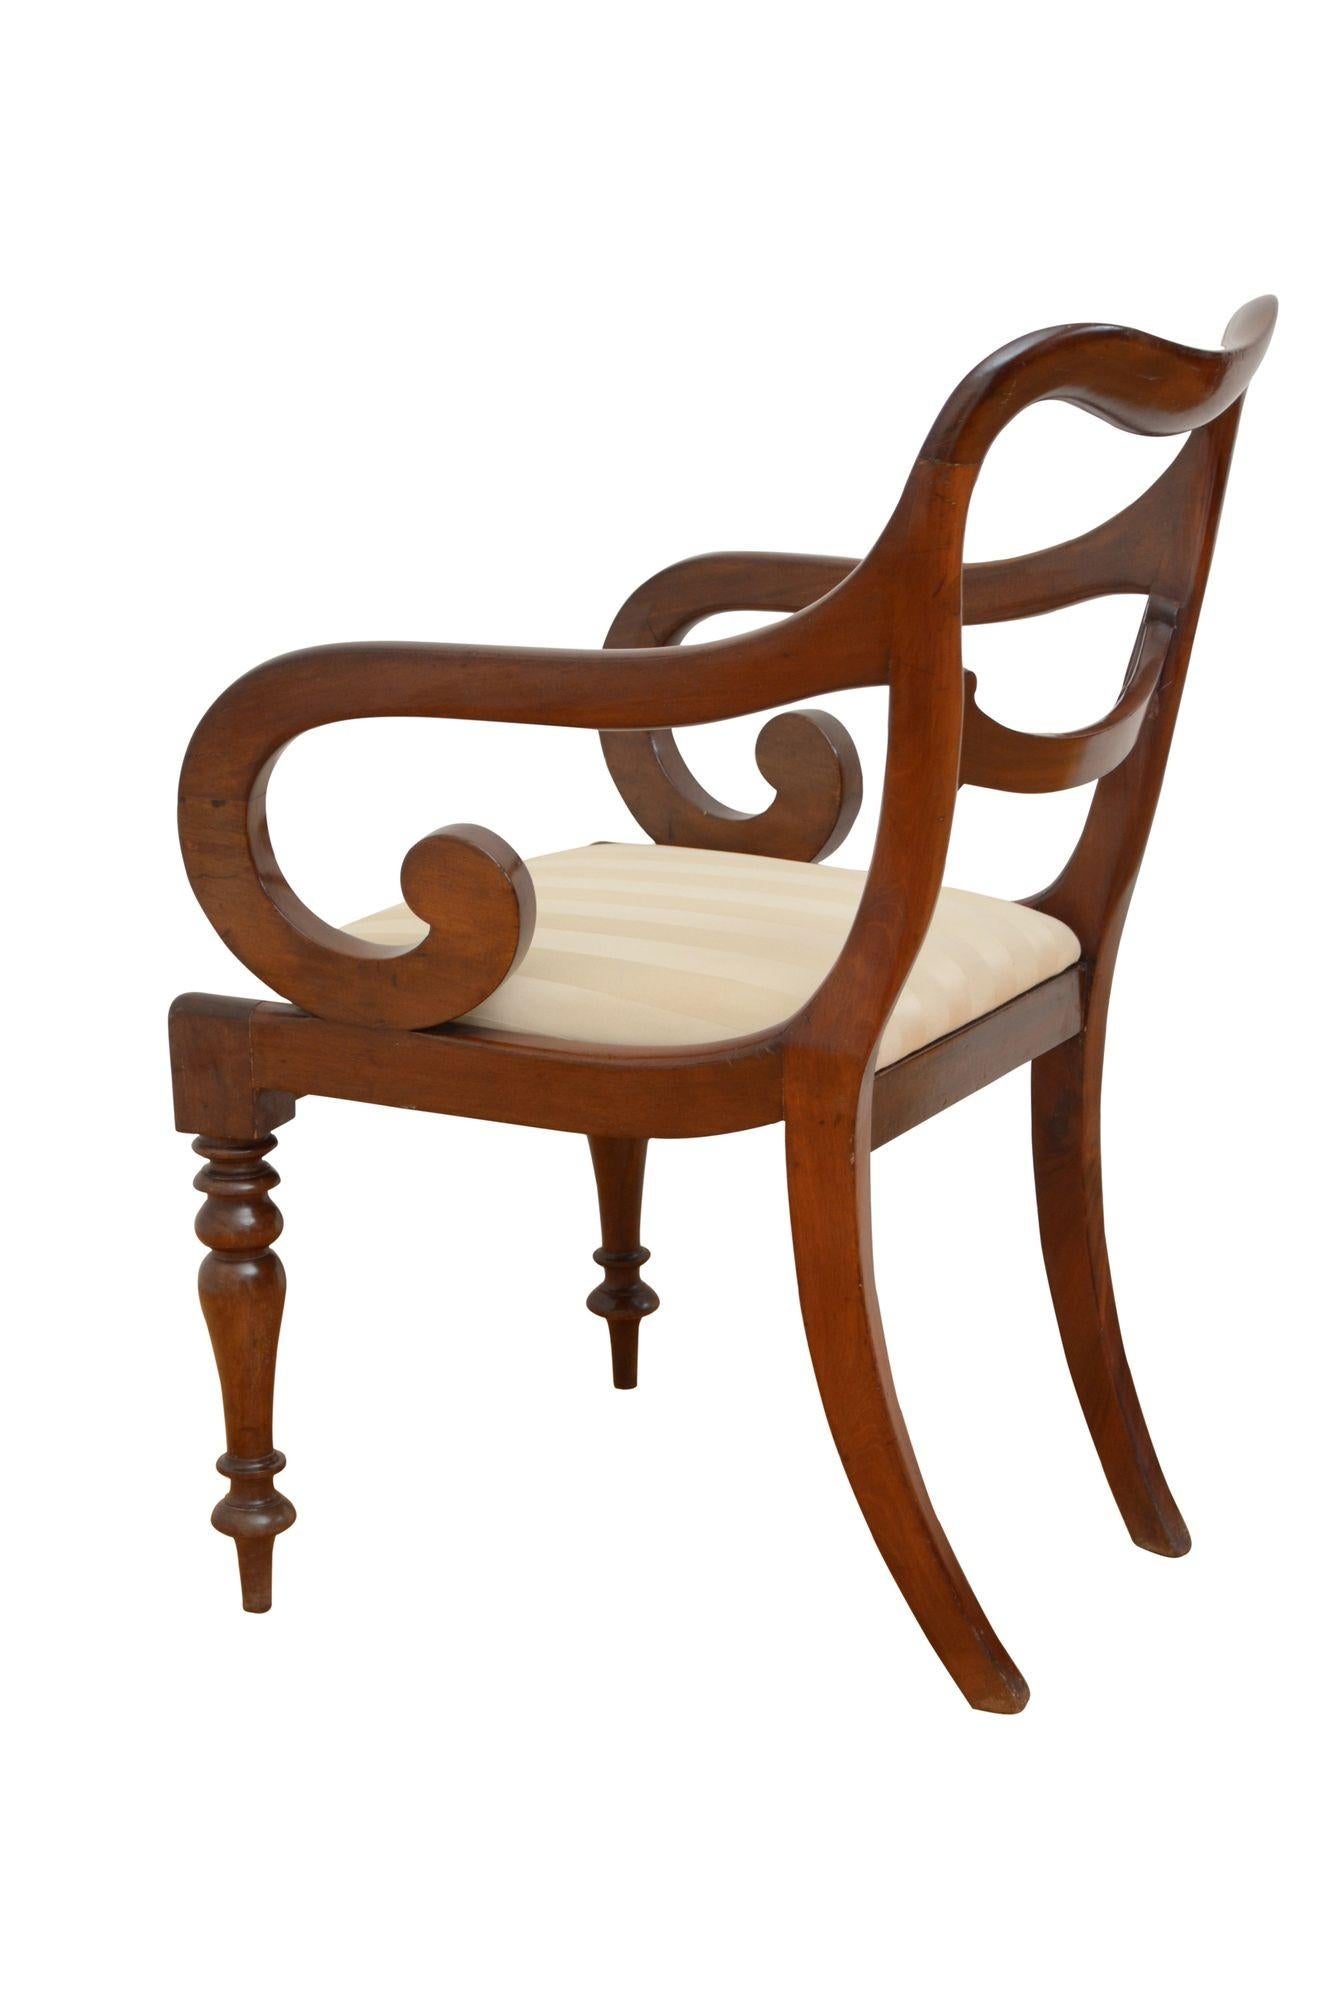 Mahogany William IV Desk Chair Carver Chair Office Chair Elbow Chair For Sale